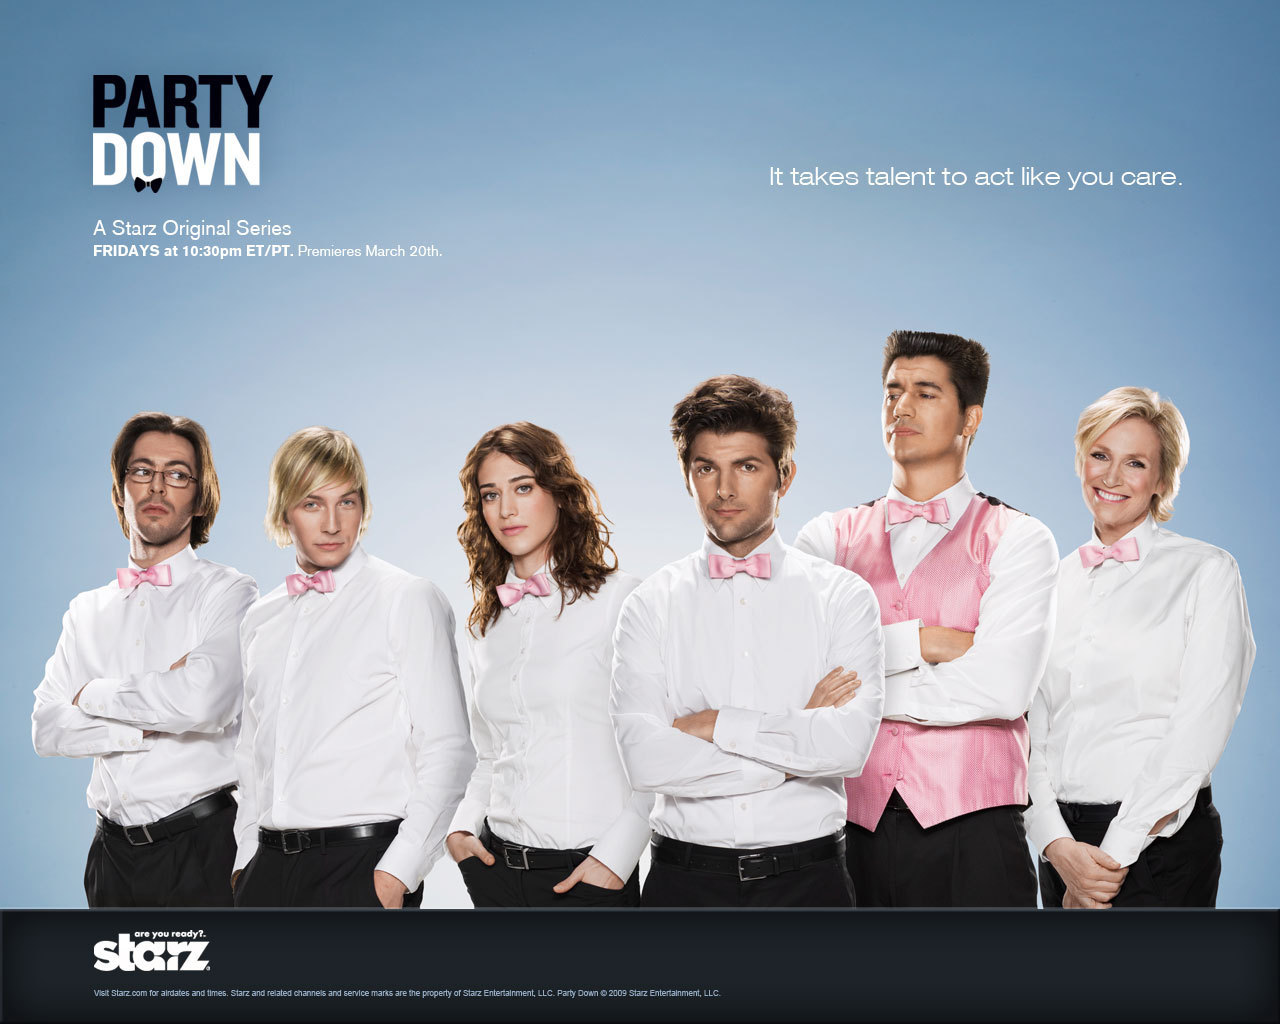 Party-Down-Wallpaper-party-down-6945059-1280-1024.jpg